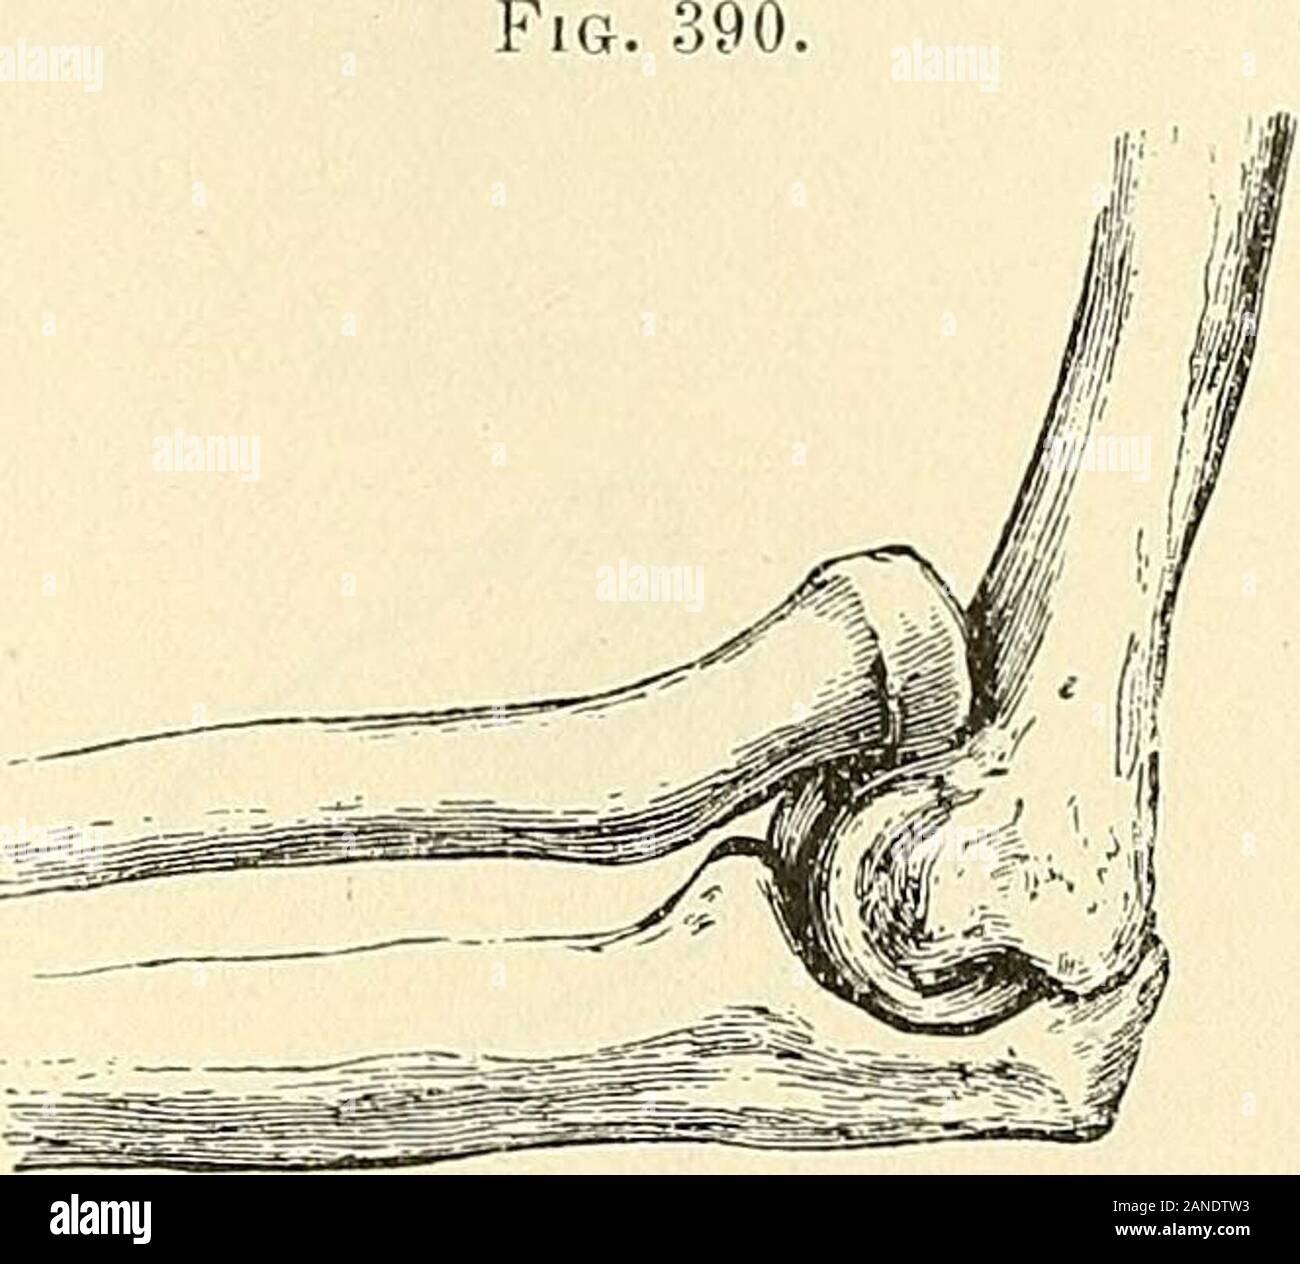 A practical treatise on fractures and dislocations . rearms, practised for the purpose of resuscitatingthe child. 1 Batchelder, New York Journ. Med., May, 1856, p. 333. 2 Sylvester, Araer. Journ. Med. Sci., vol. xxxi. p. 206, Jan. 1843. 3 Goyrand, Ibid., vol. xxxii. p. 228, July, 1843. 4 Krackowizer, New York Journ. Med., March, 1857, p. 262. 5 Leisrinck, Deuts. Zeitschrift fiir Chir., Dec. 12, 1873. DISLOCATIONS OF HEAD OF RADIUS FORWARD 617 Pathological Anatomy.—The head of the radius is carried forwardupon the humerus, and generally a little outward. In the case of LydiaMerton, already ment Stock Photo